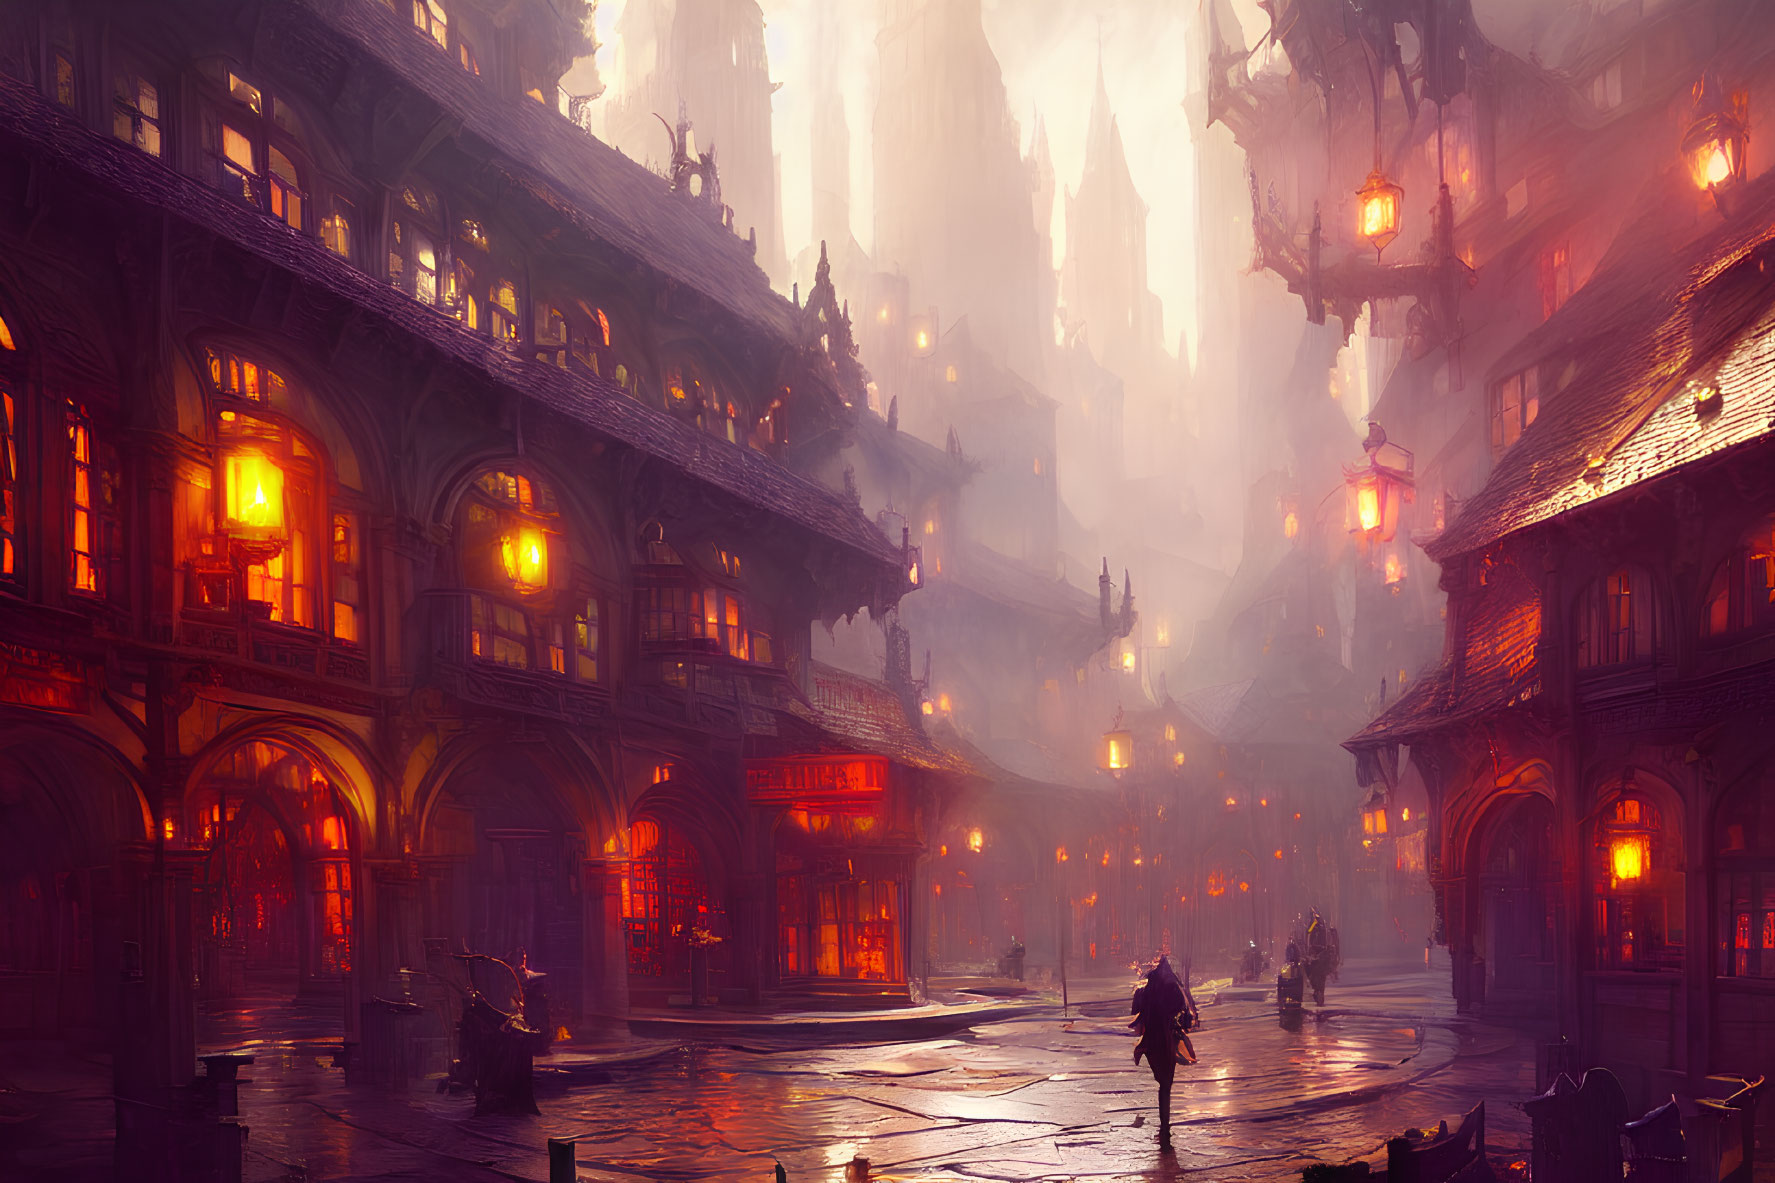 Fantasy cityscape at dusk with glowing lights and towering spires